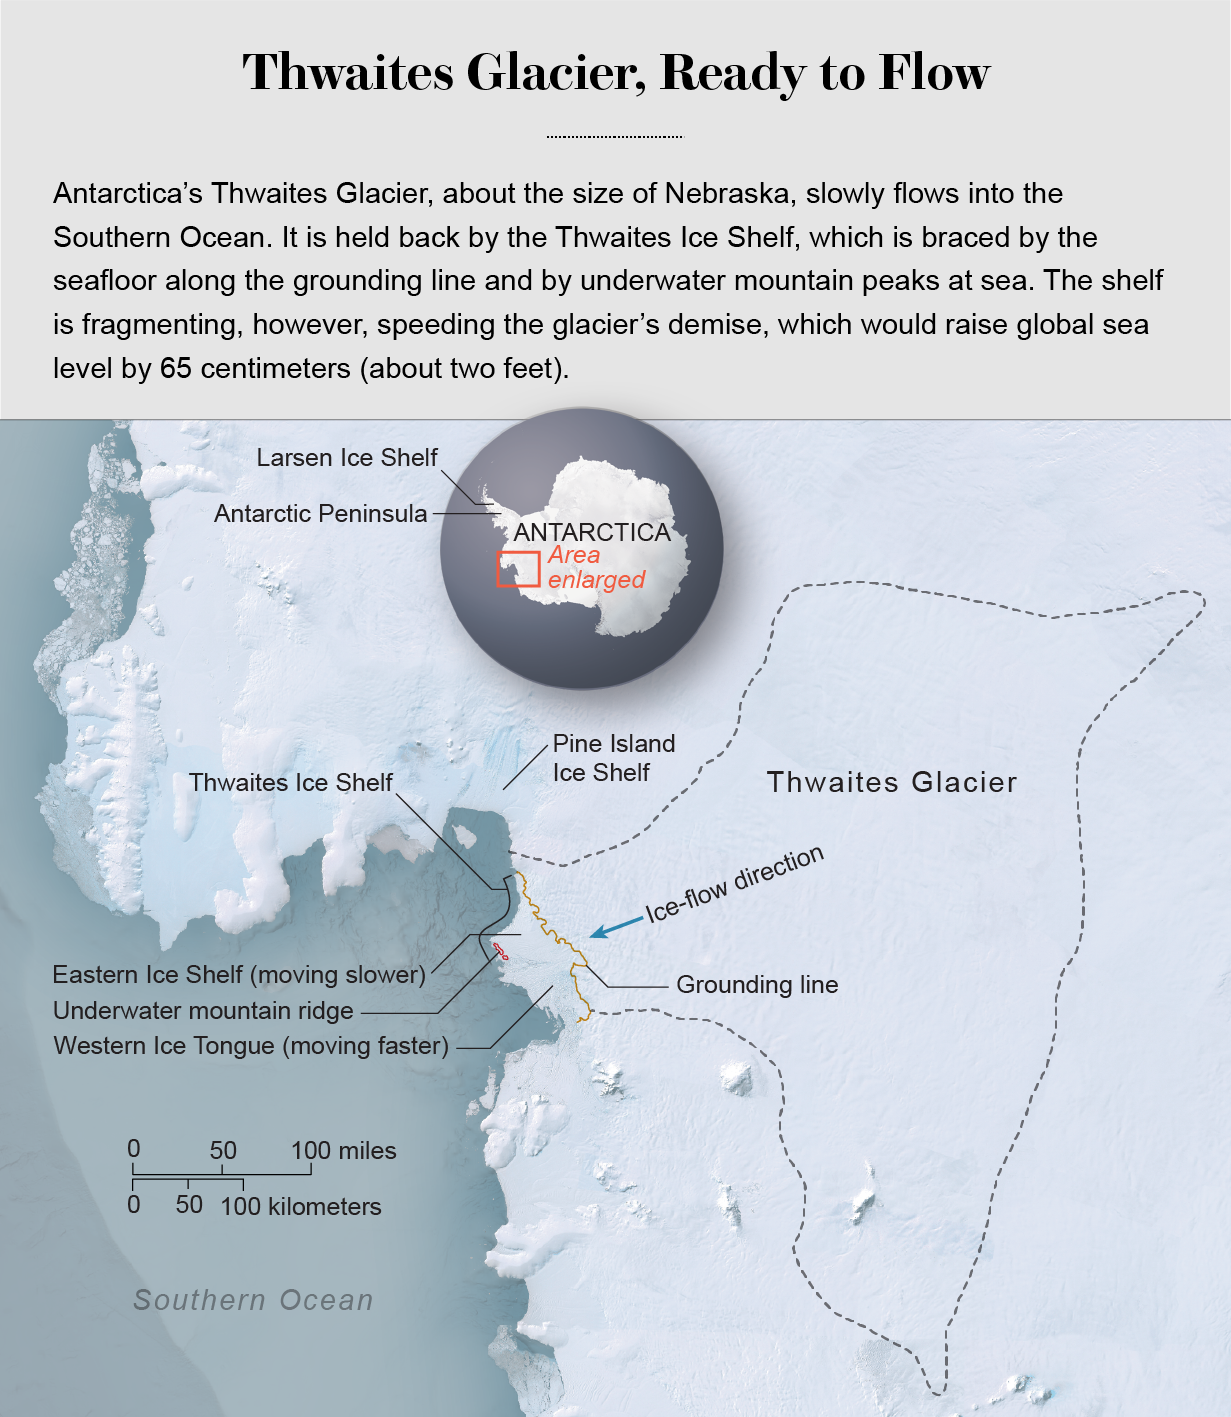 Map of Thwaites Glacier shows grounding line, slow-moving Eastern Ice Shelf, faster Western Ice Tongue, and pinning point.